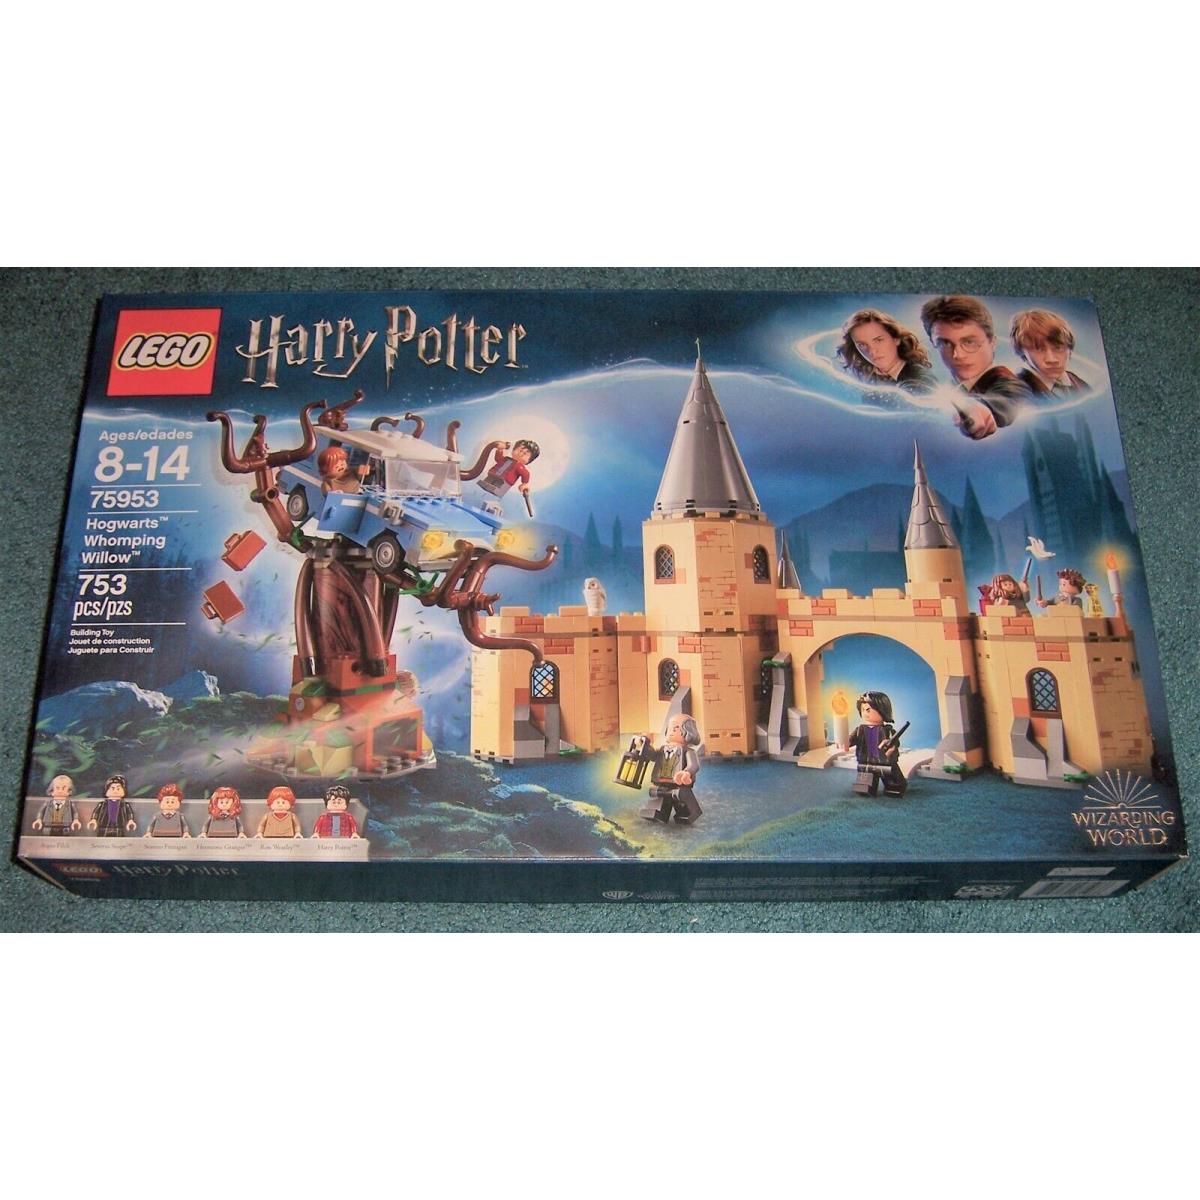 Lego Harry Potter Hogwarts Whomping Willow 75953 Set Snape Argus Filch Ron